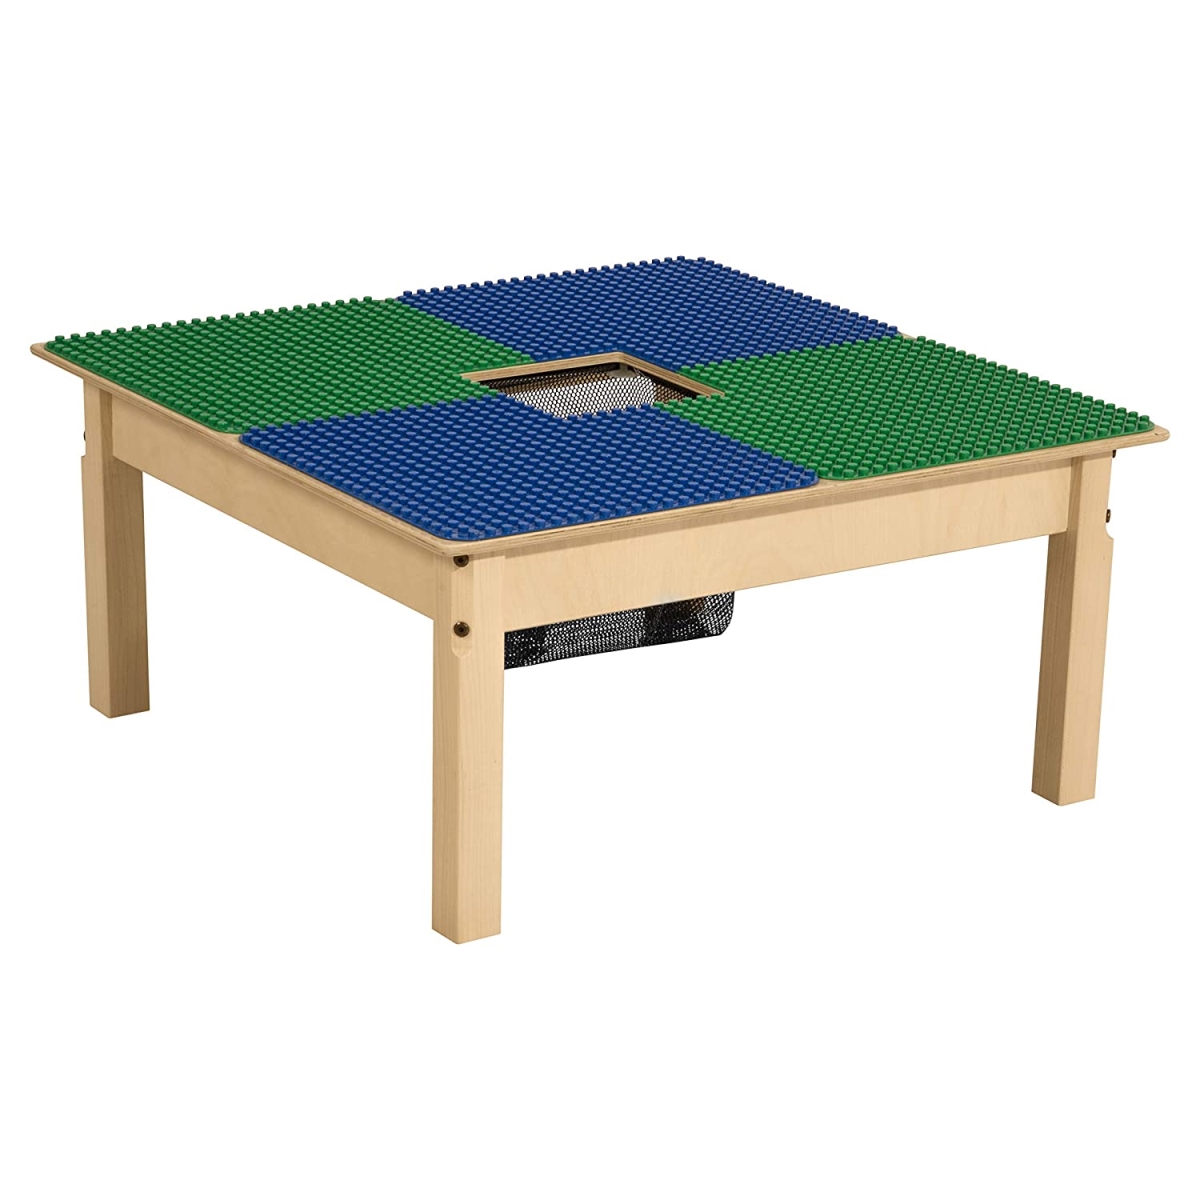 Tp3131pgn20-bg 20 In. Duplo Compatible Table With Legs, Blue & Green - Square